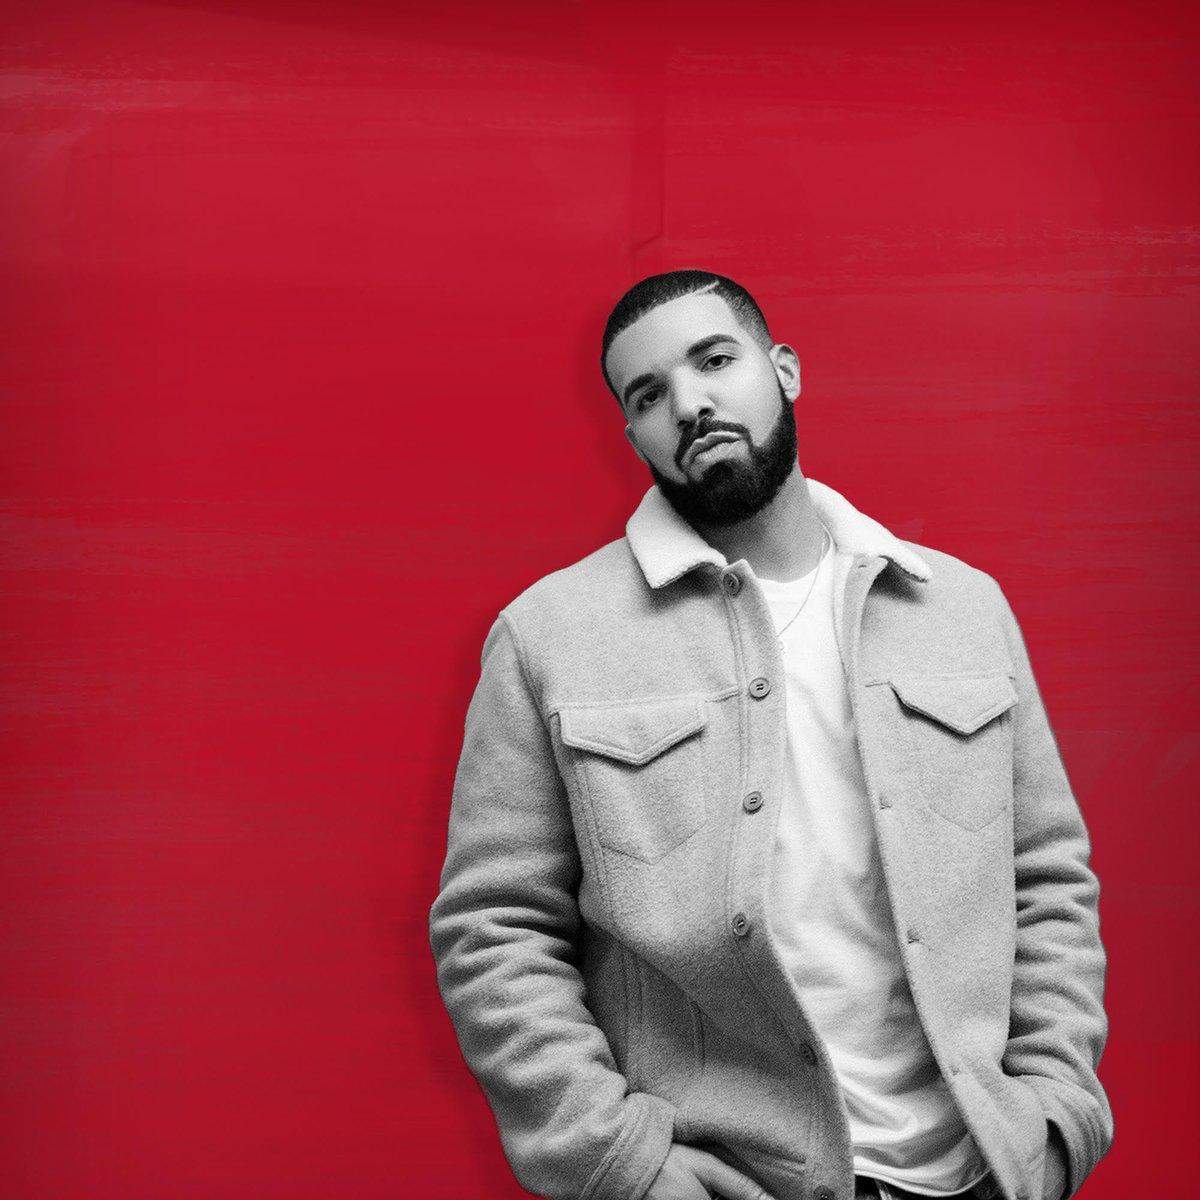 Drake becomes the top recipient in the Billboard Music Awards.!